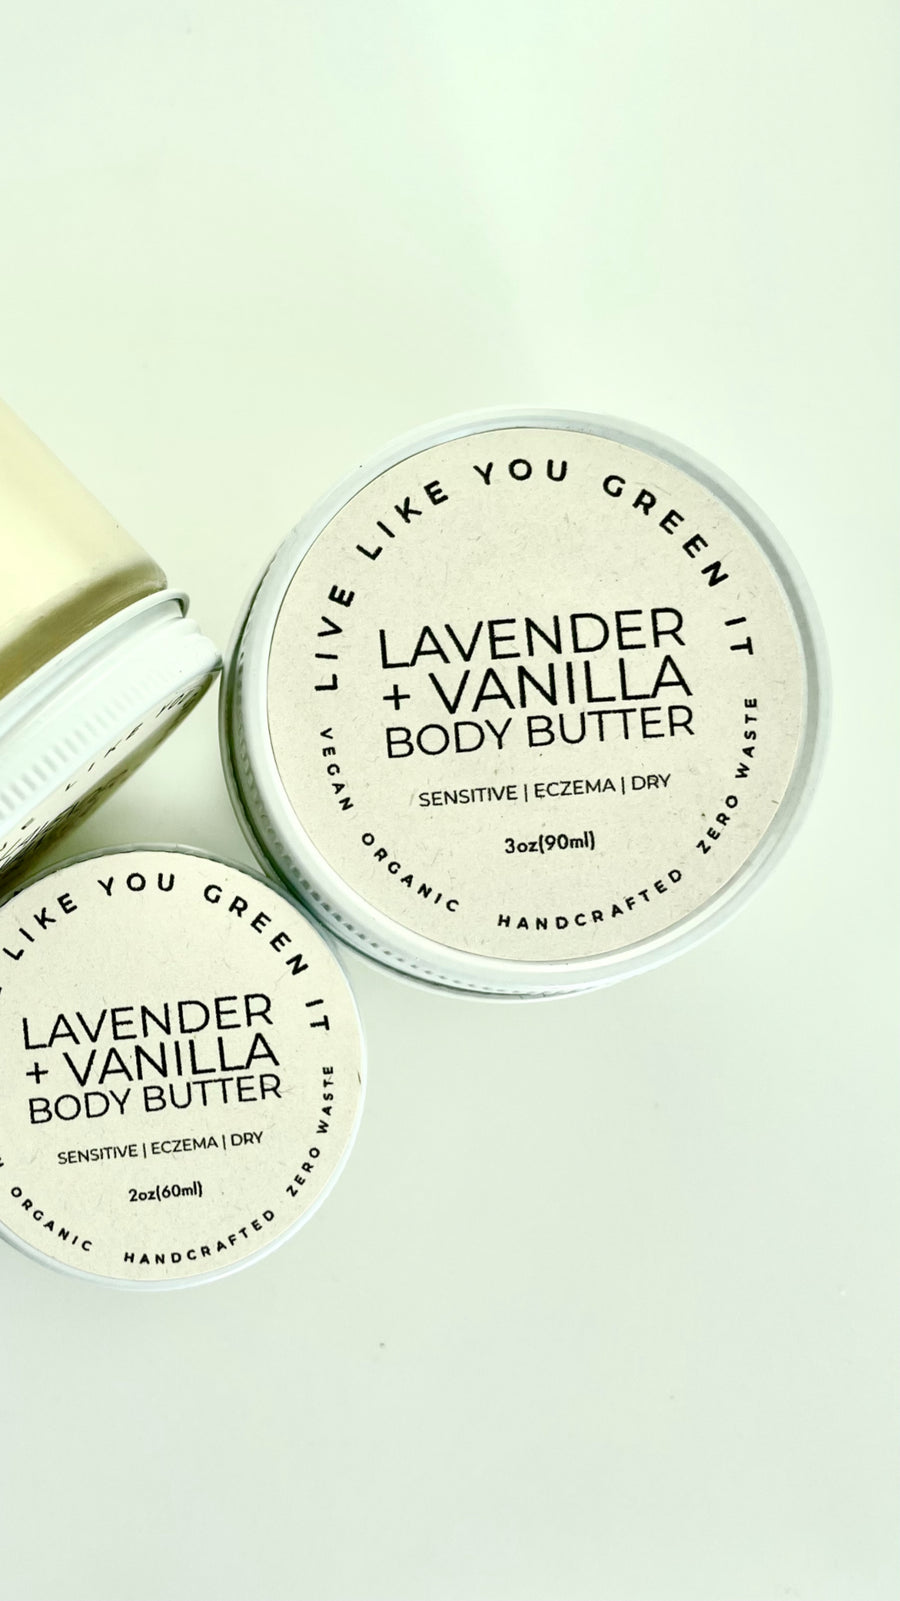 3 Lavender + Vanilla Body Butter jars from Live Like You Green It against a white background